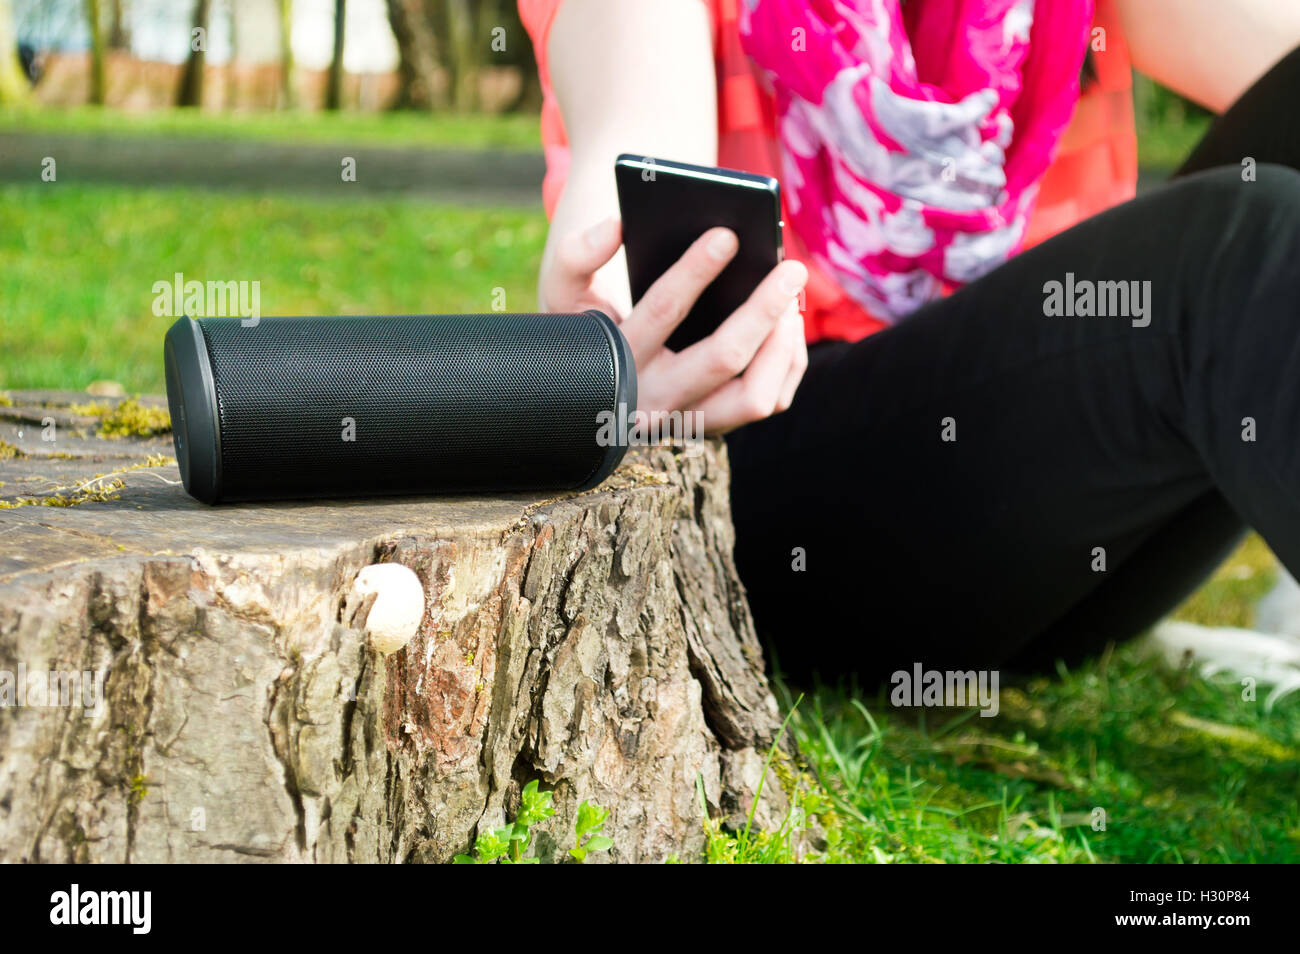 Woman is connecting her smartphone with wireless speaker while being outdoor. Stock Photo